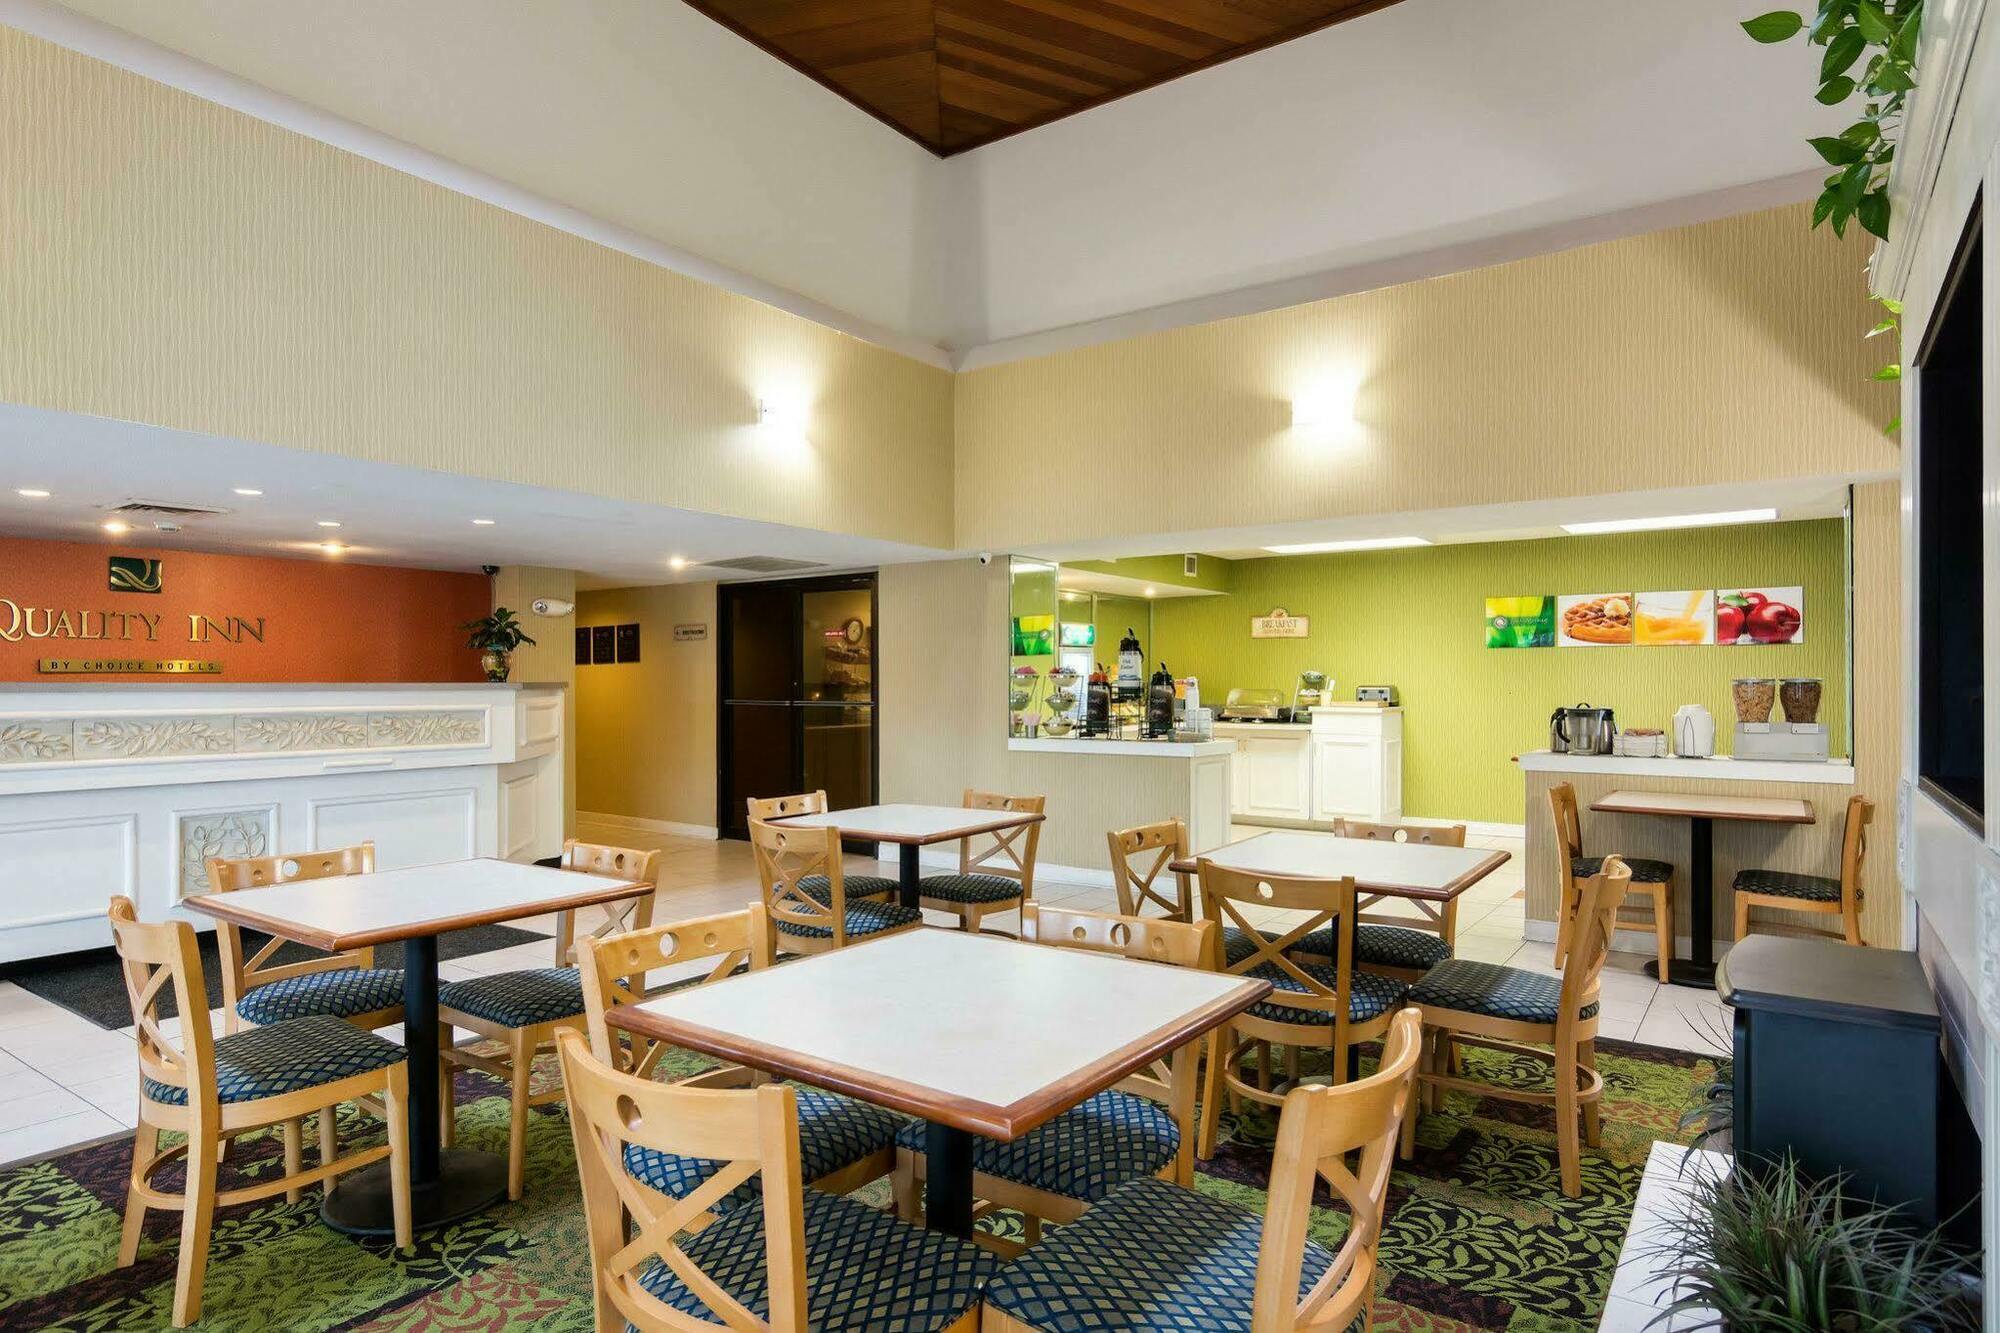 HOTEL RODEWAY INN FORT LEE HOPEWELL, VA 3* (United States) - from US$ 64 |  BOOKED